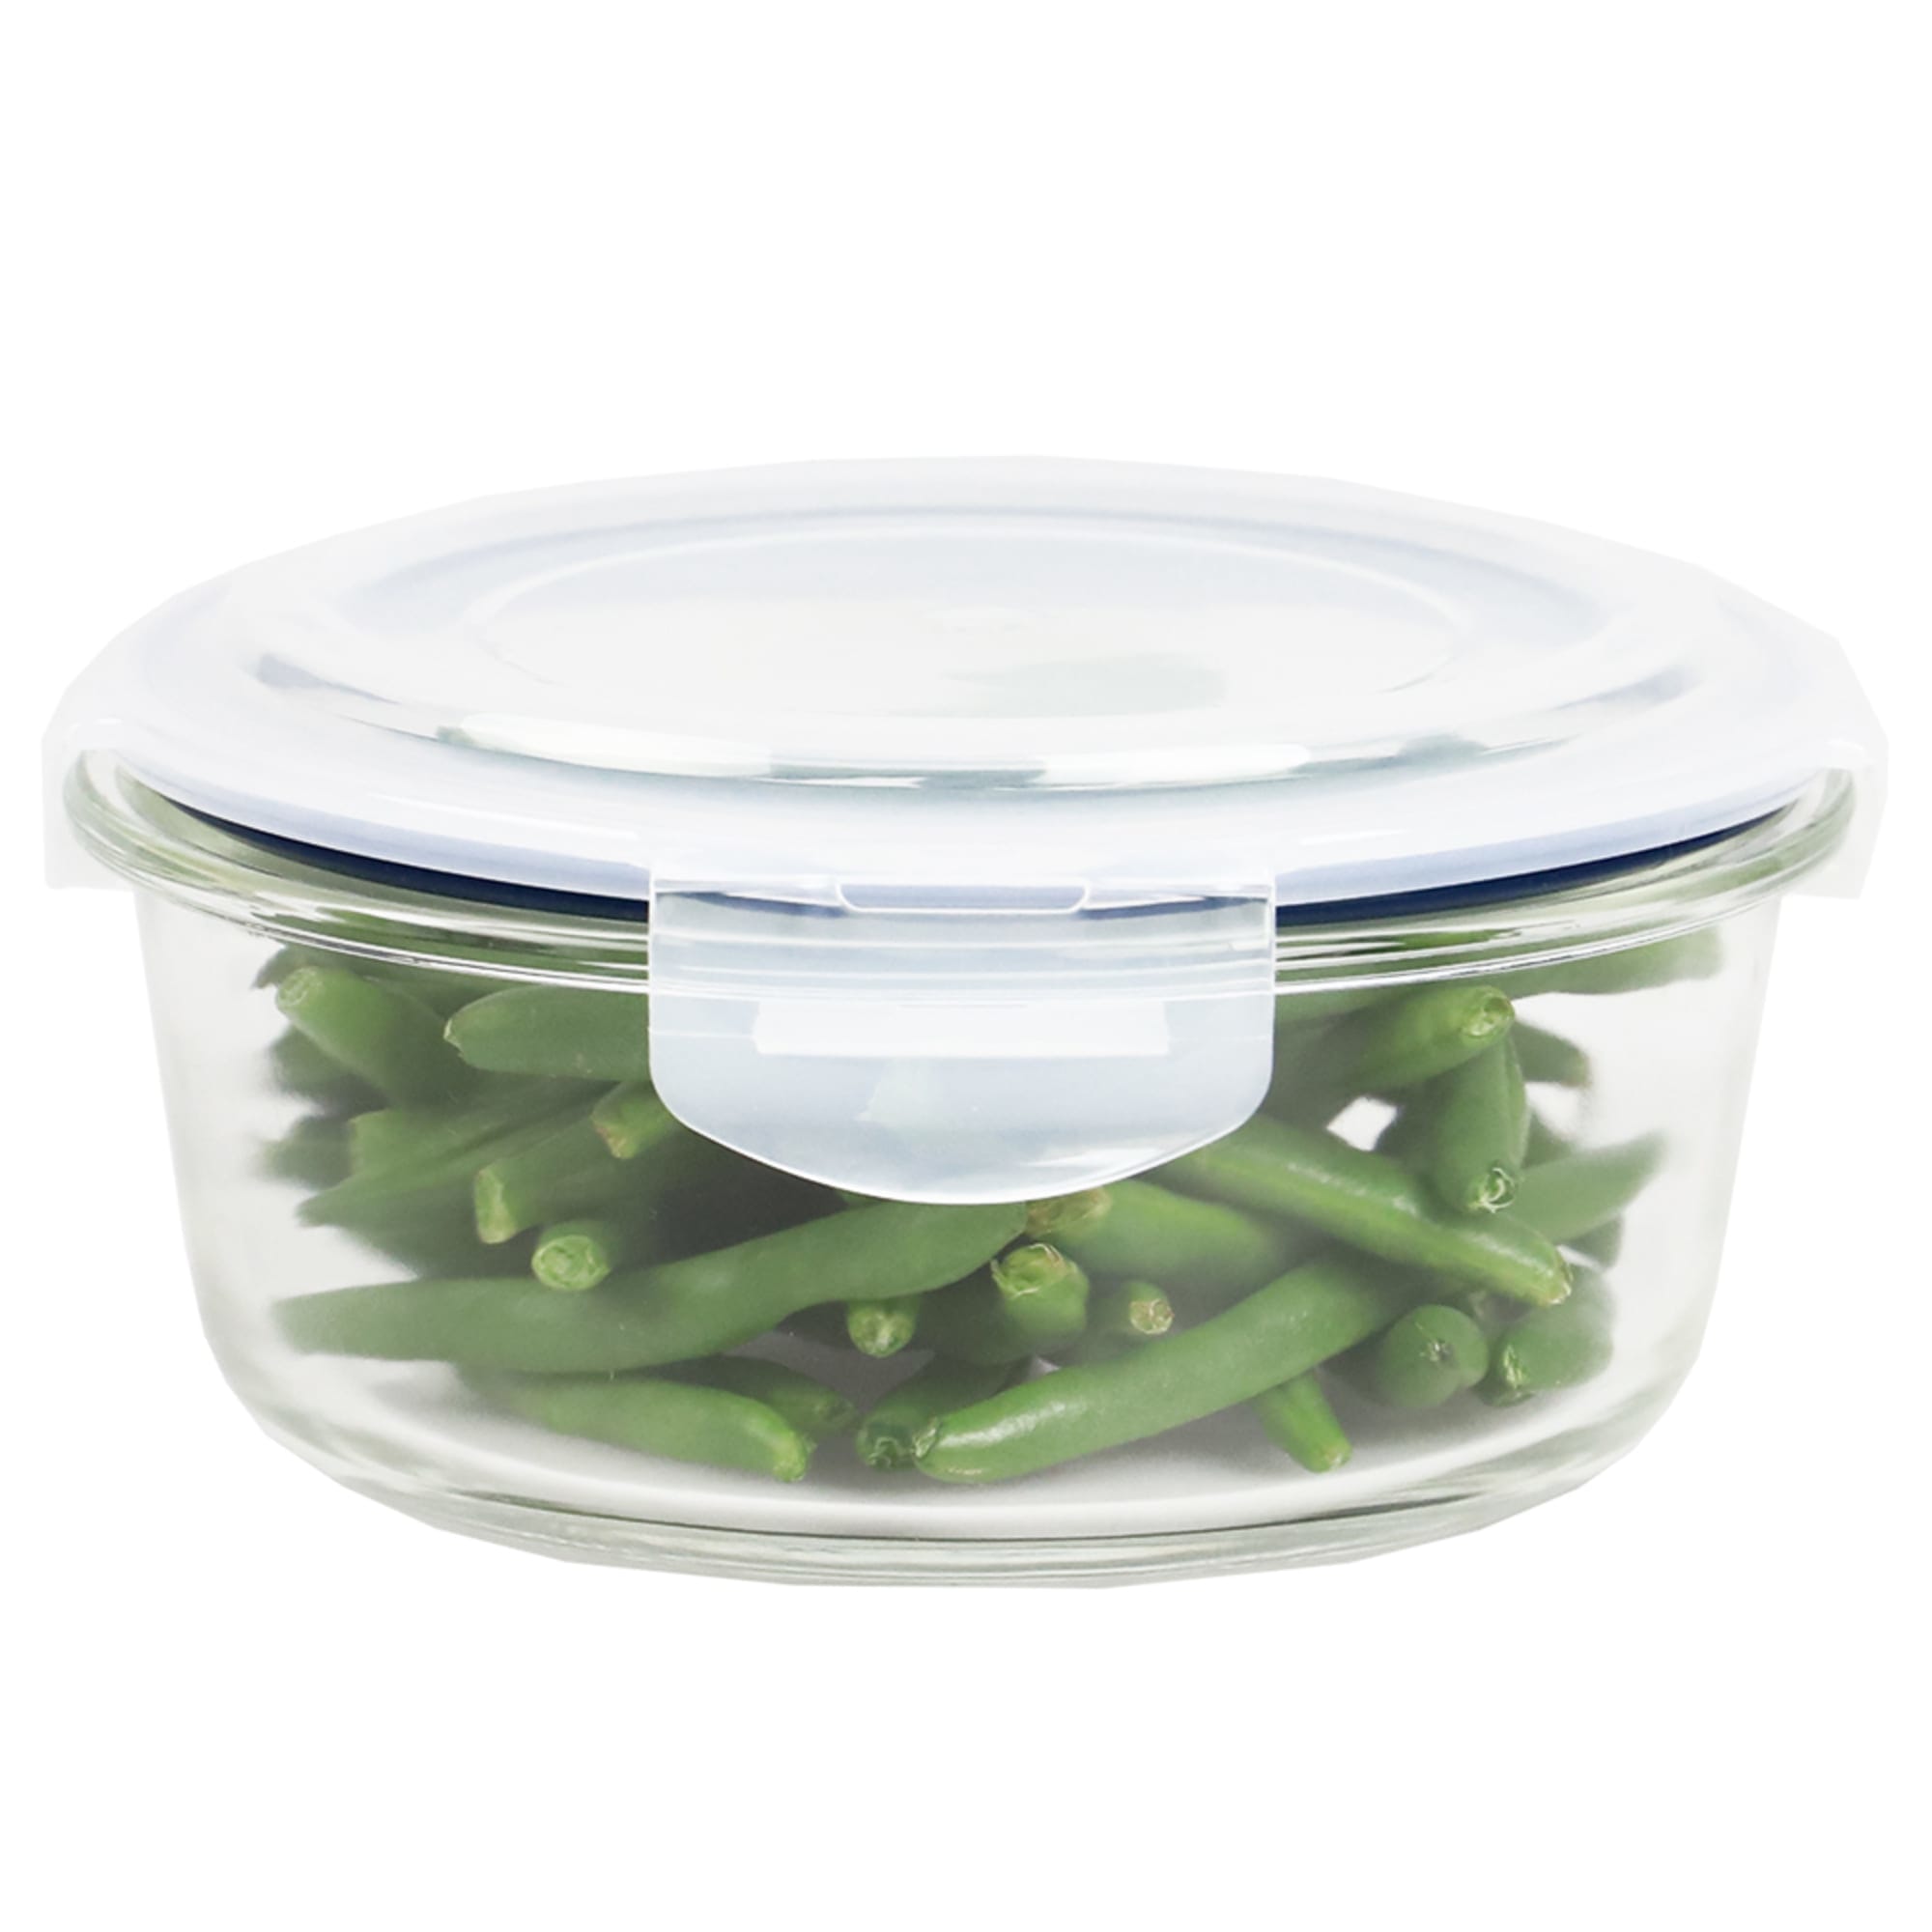 Michael Graves Design 32 Ounce High Borosilicate Glass Round Food Storage Container with Indigo Rubber Seal $5.00 EACH, CASE PACK OF 12